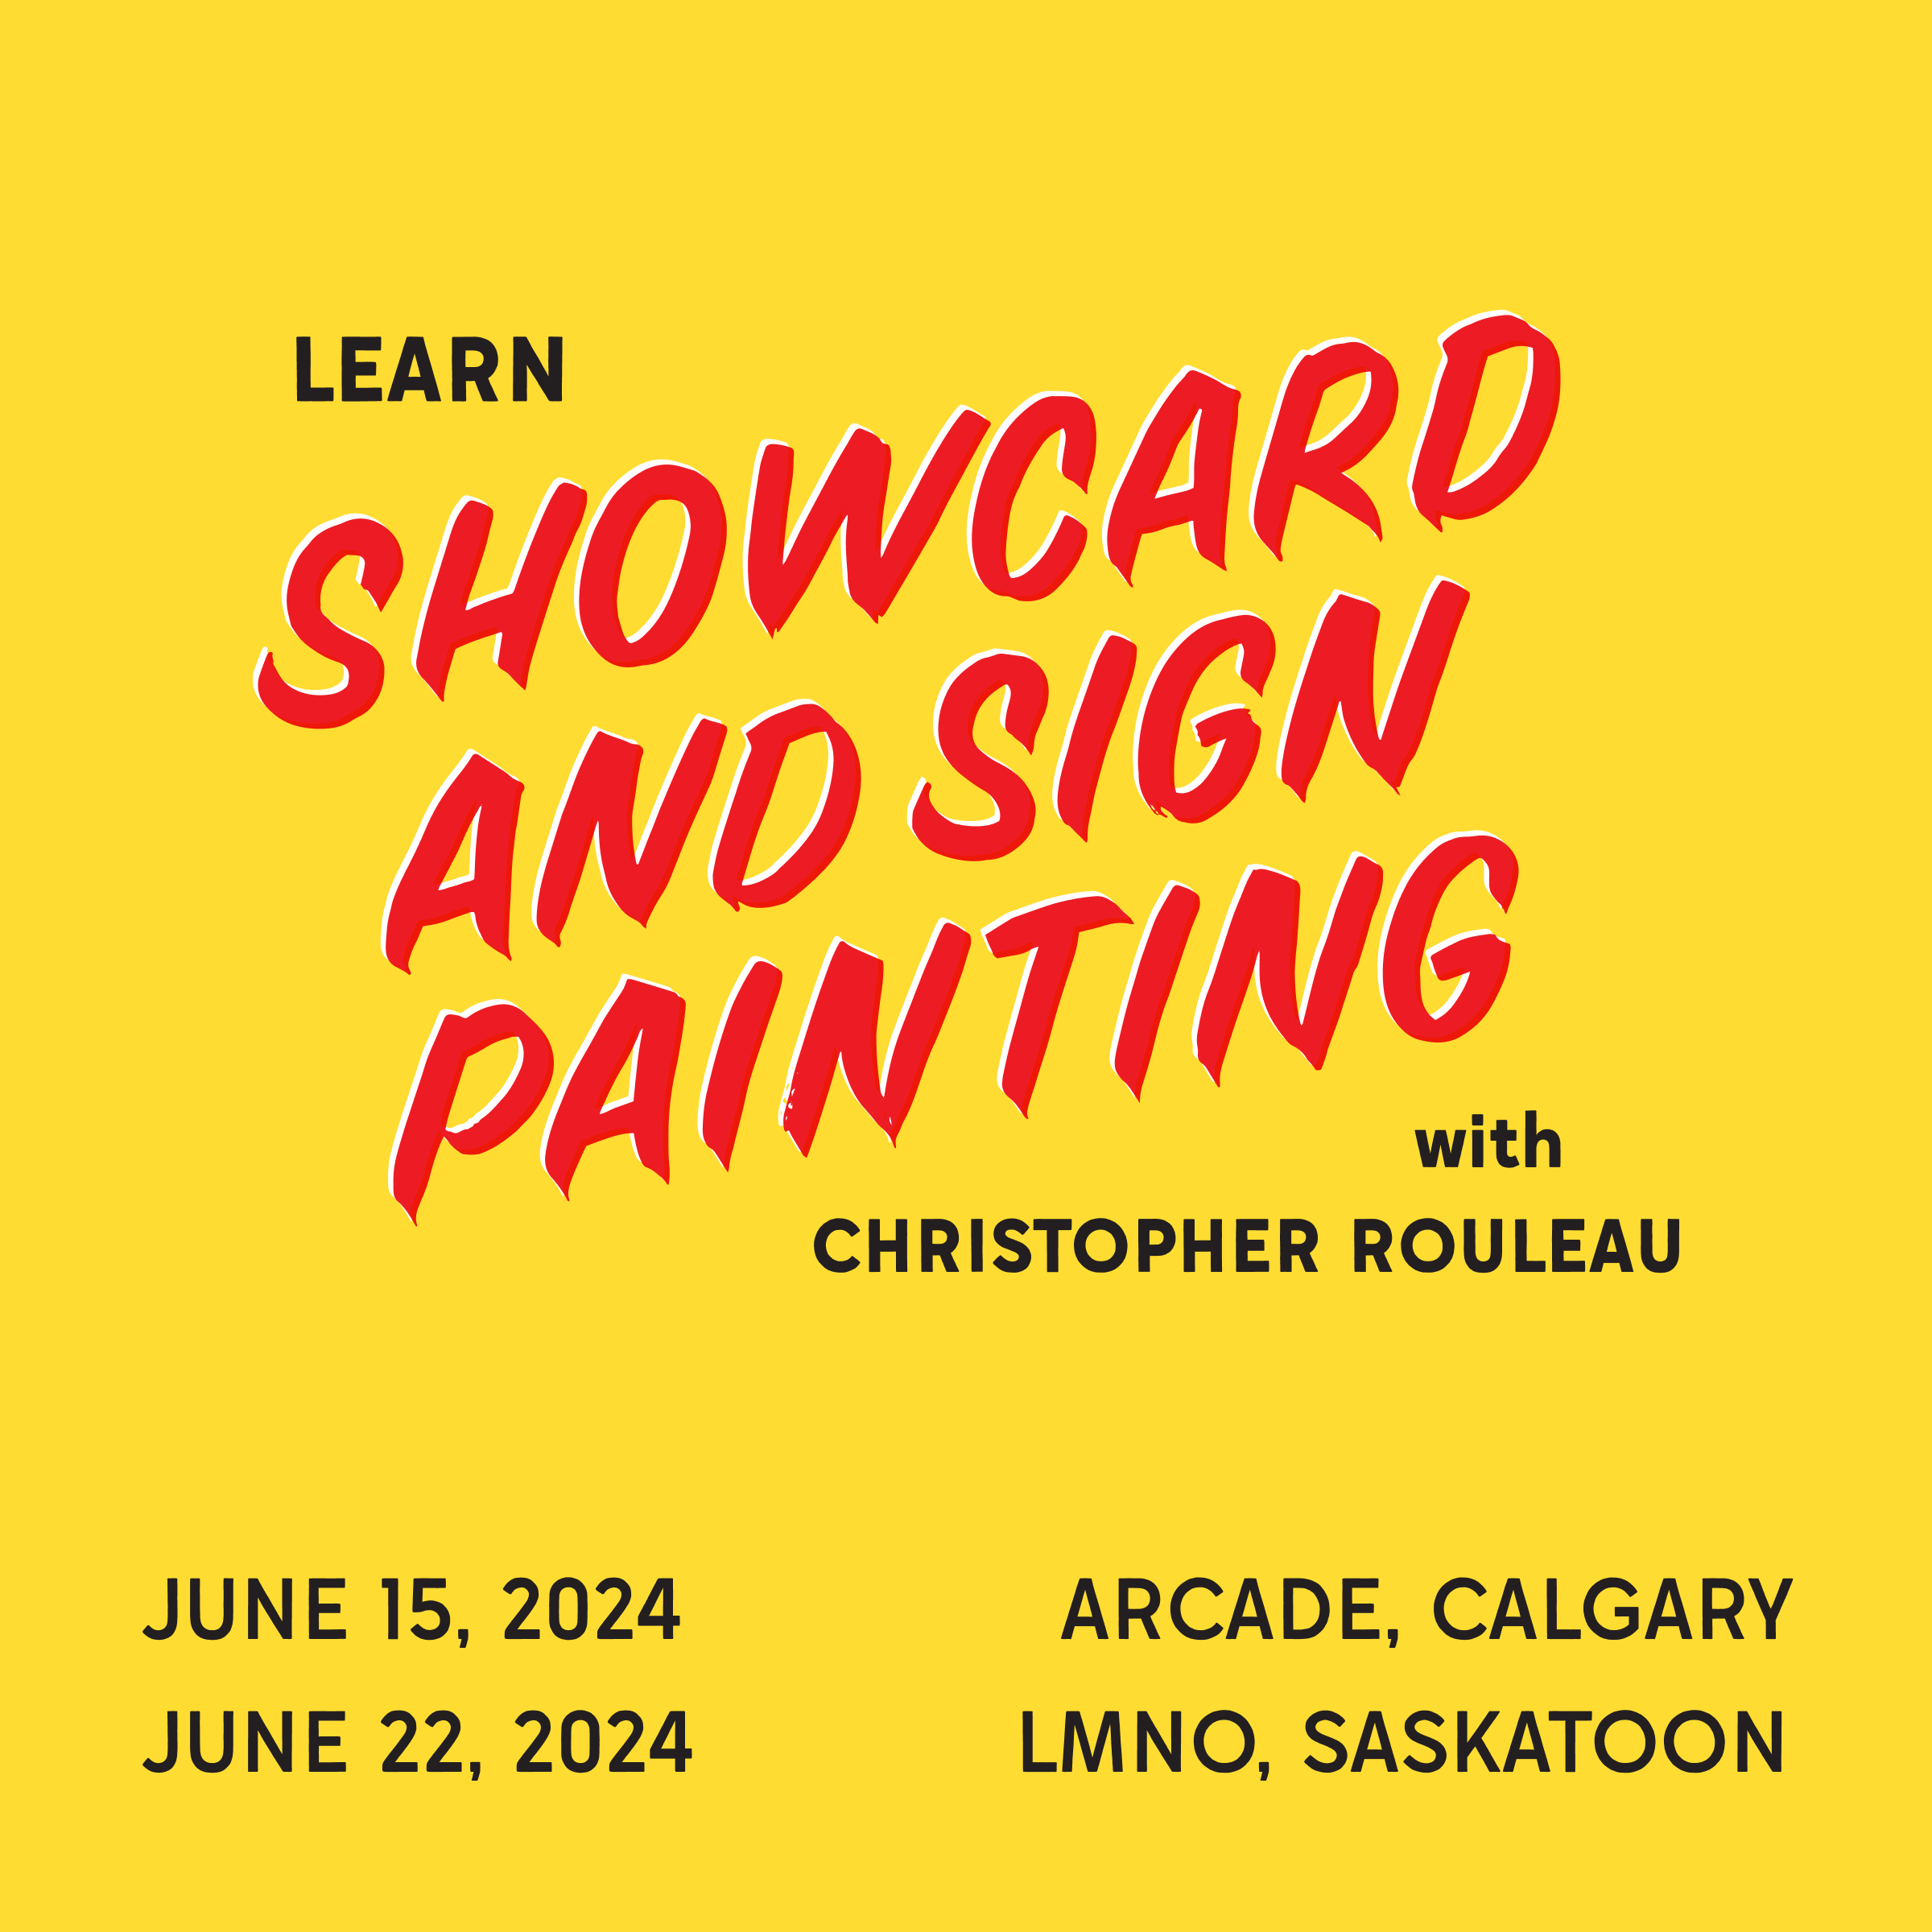 Learn Showcard and Sign Painting with Chris Rouleau